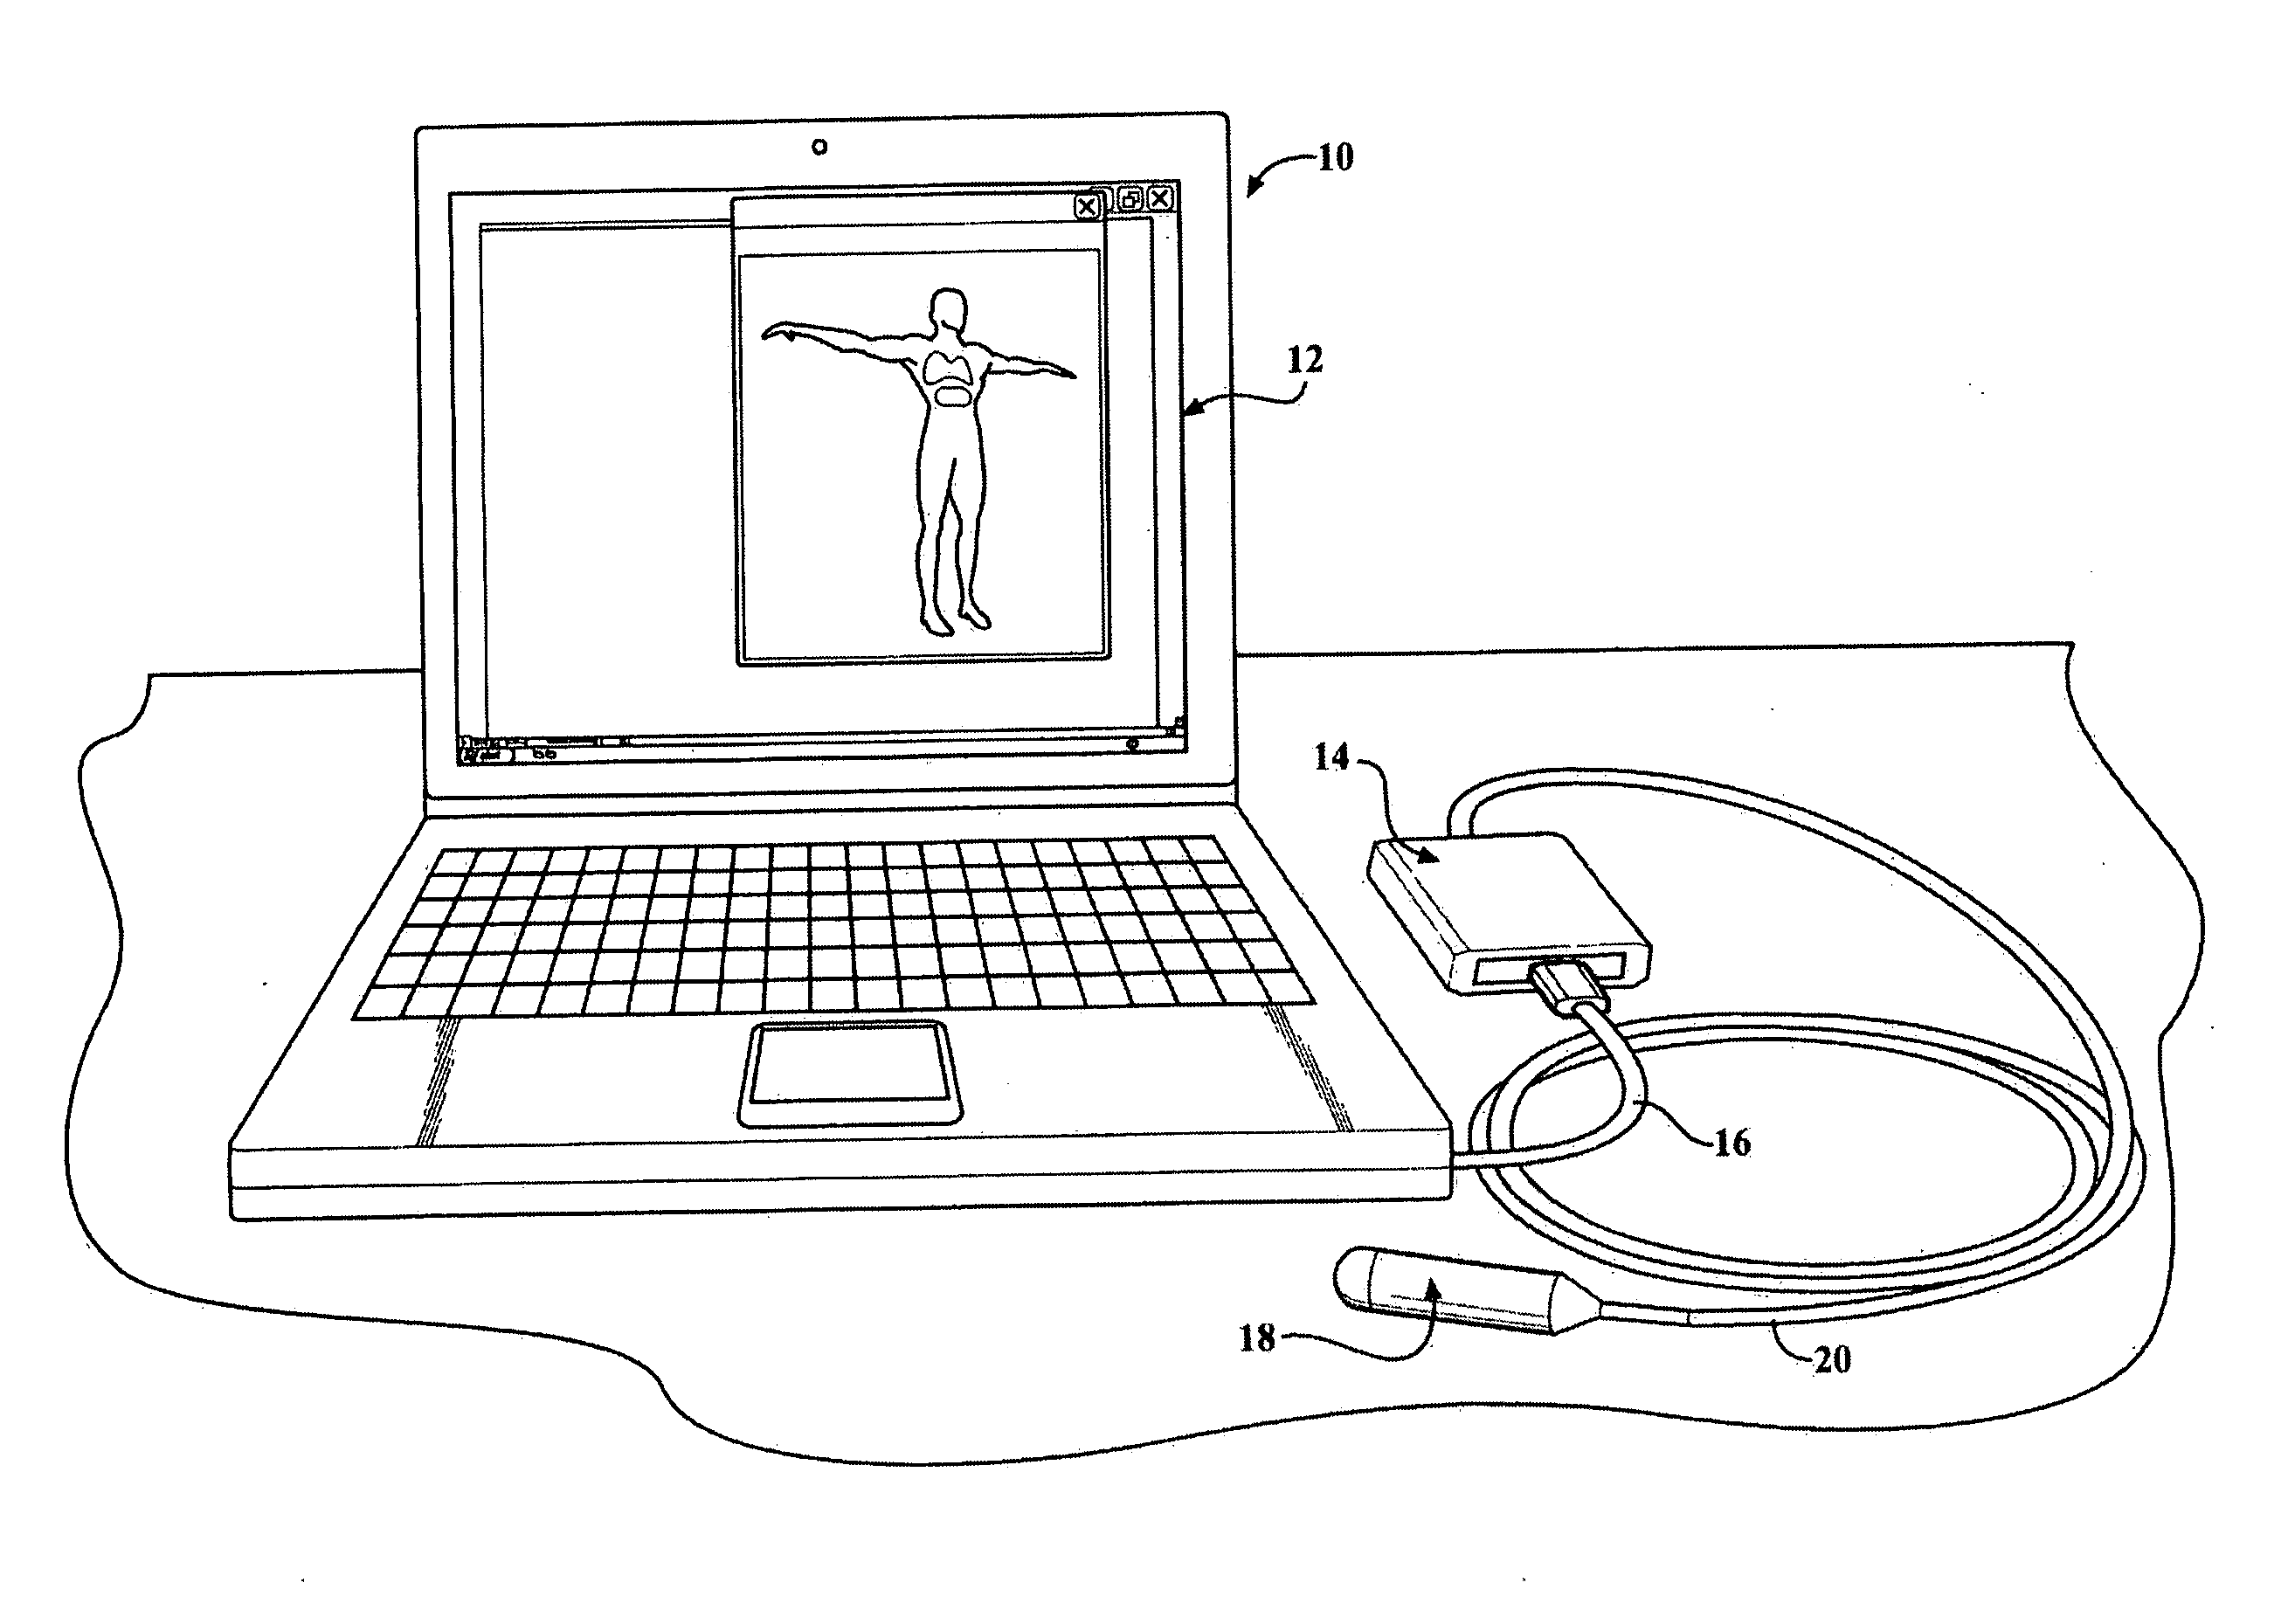 System and method for non-invasive diagnostic of mammals